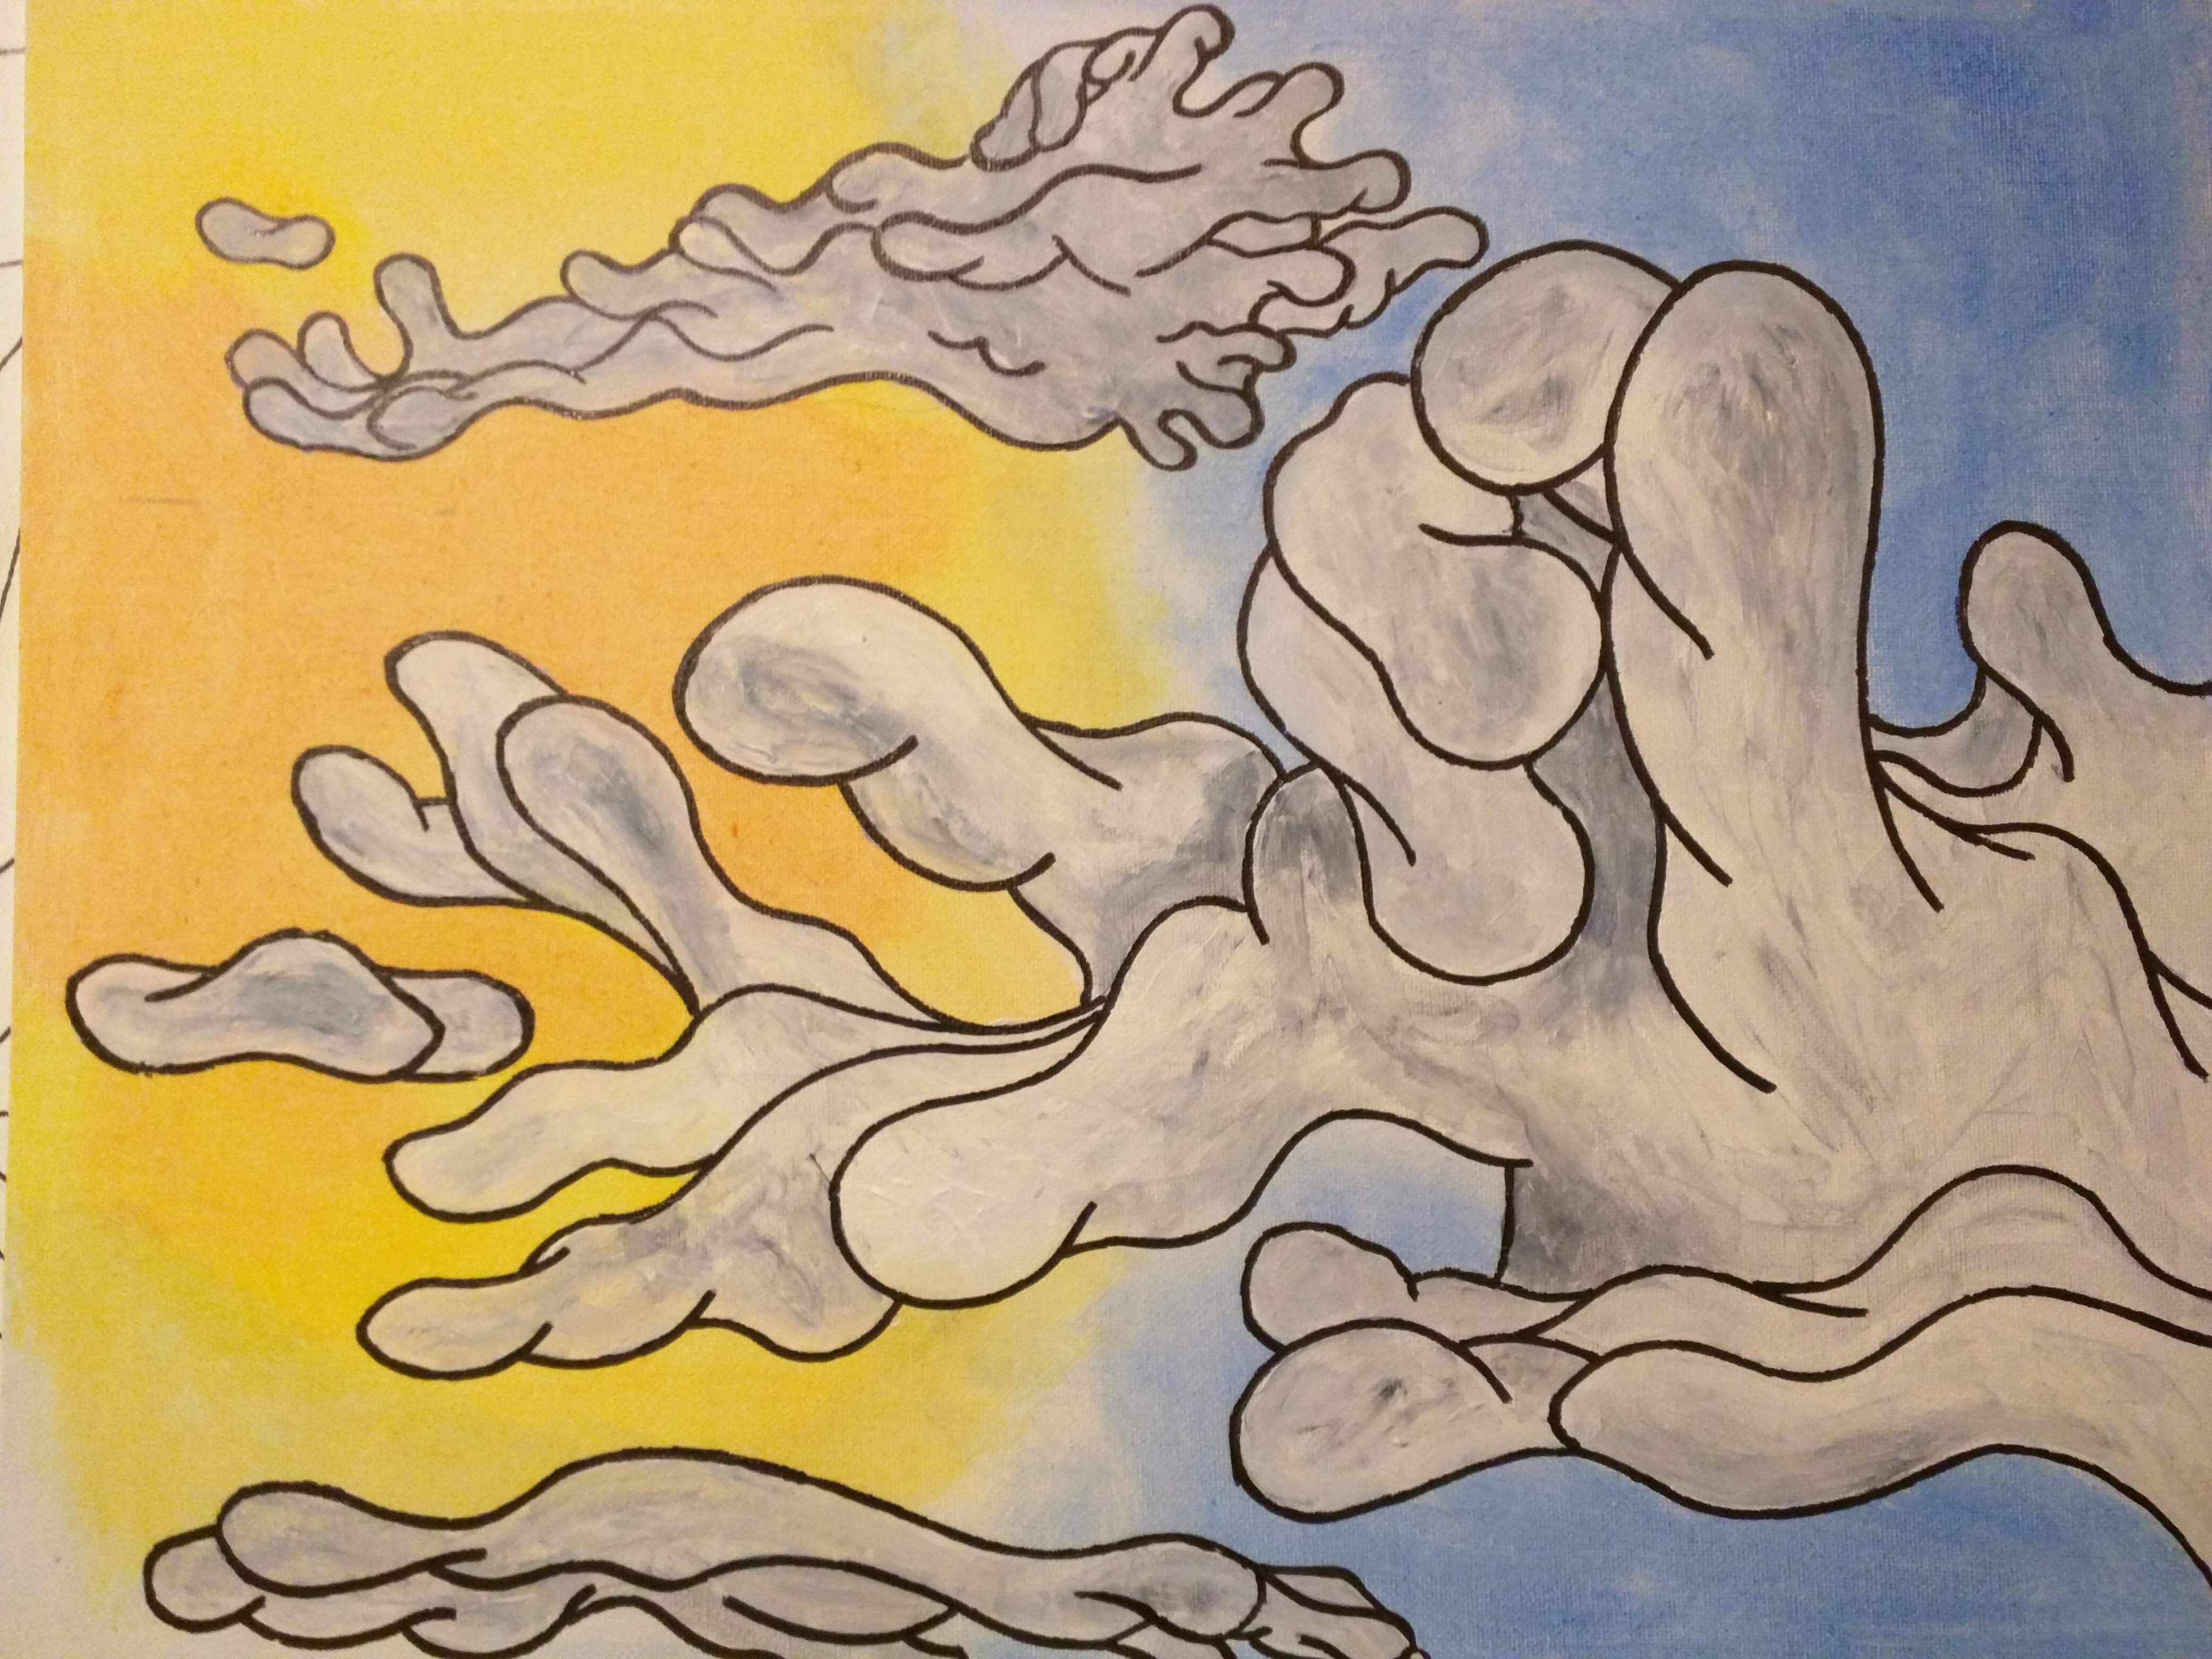 Painting of some weird, trippy clouds.